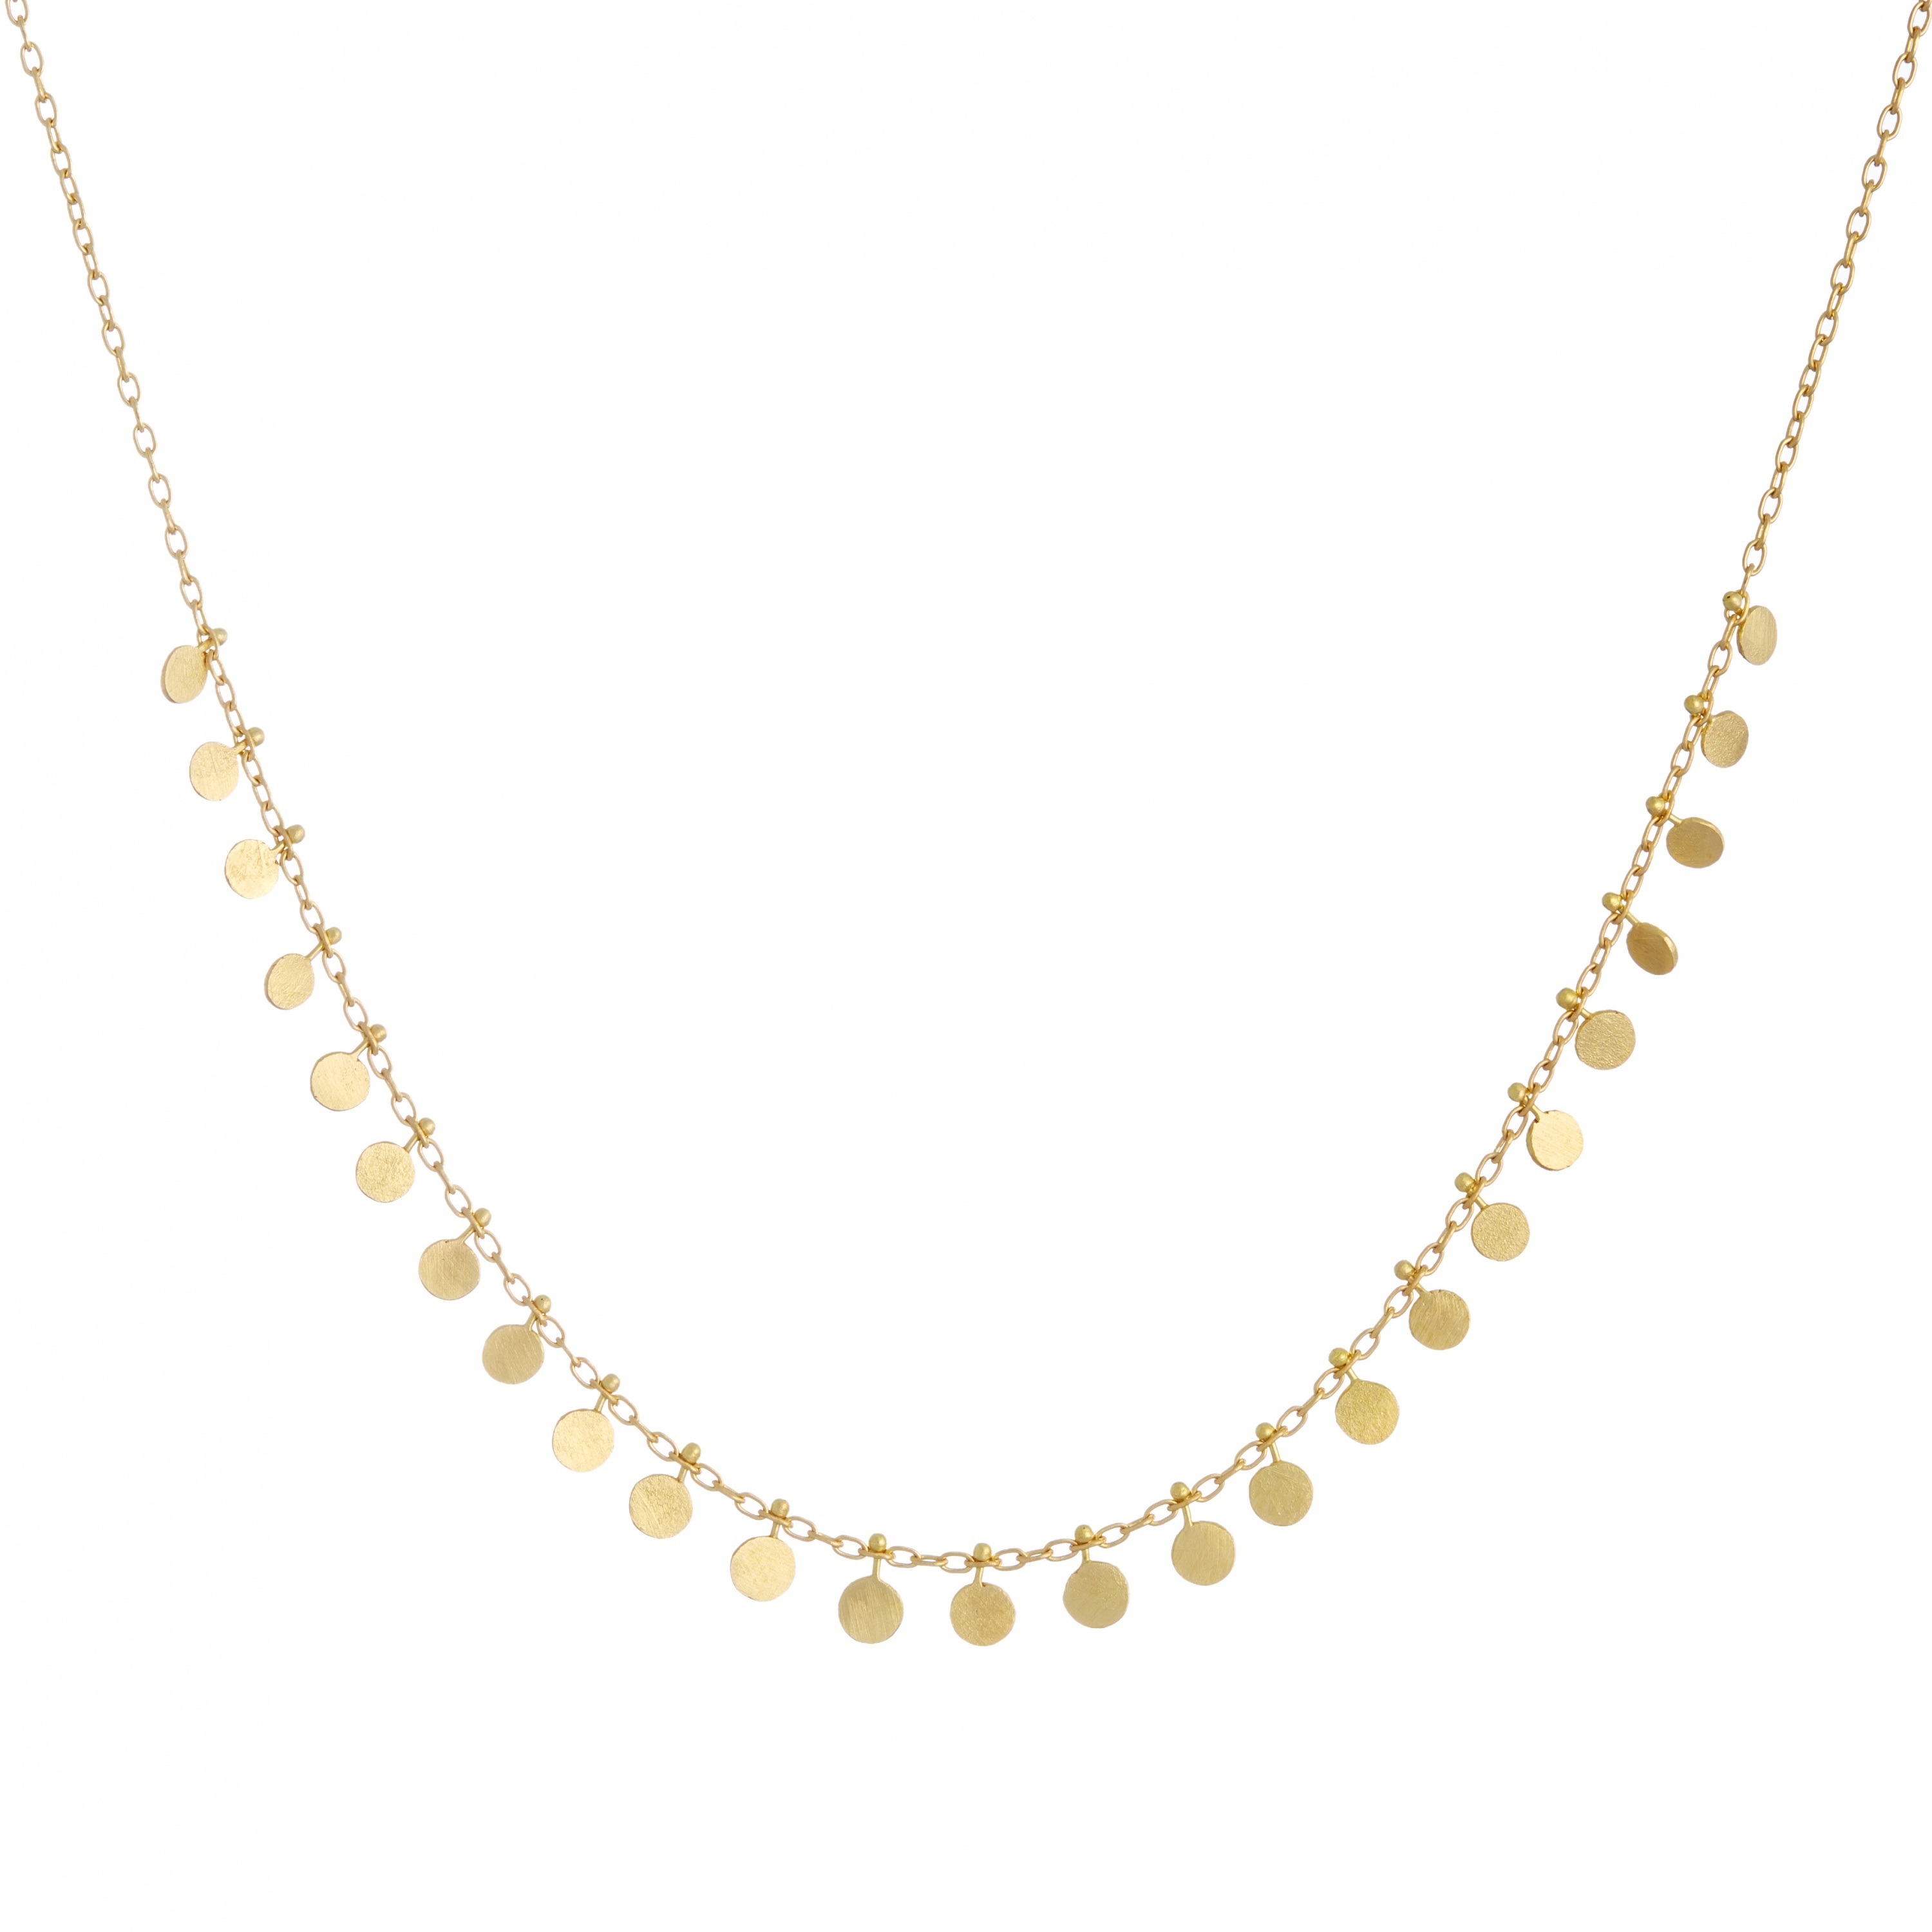 Bloomingdale's Dot Dash Link Chain Necklace in 14K Yellow Gold, 18